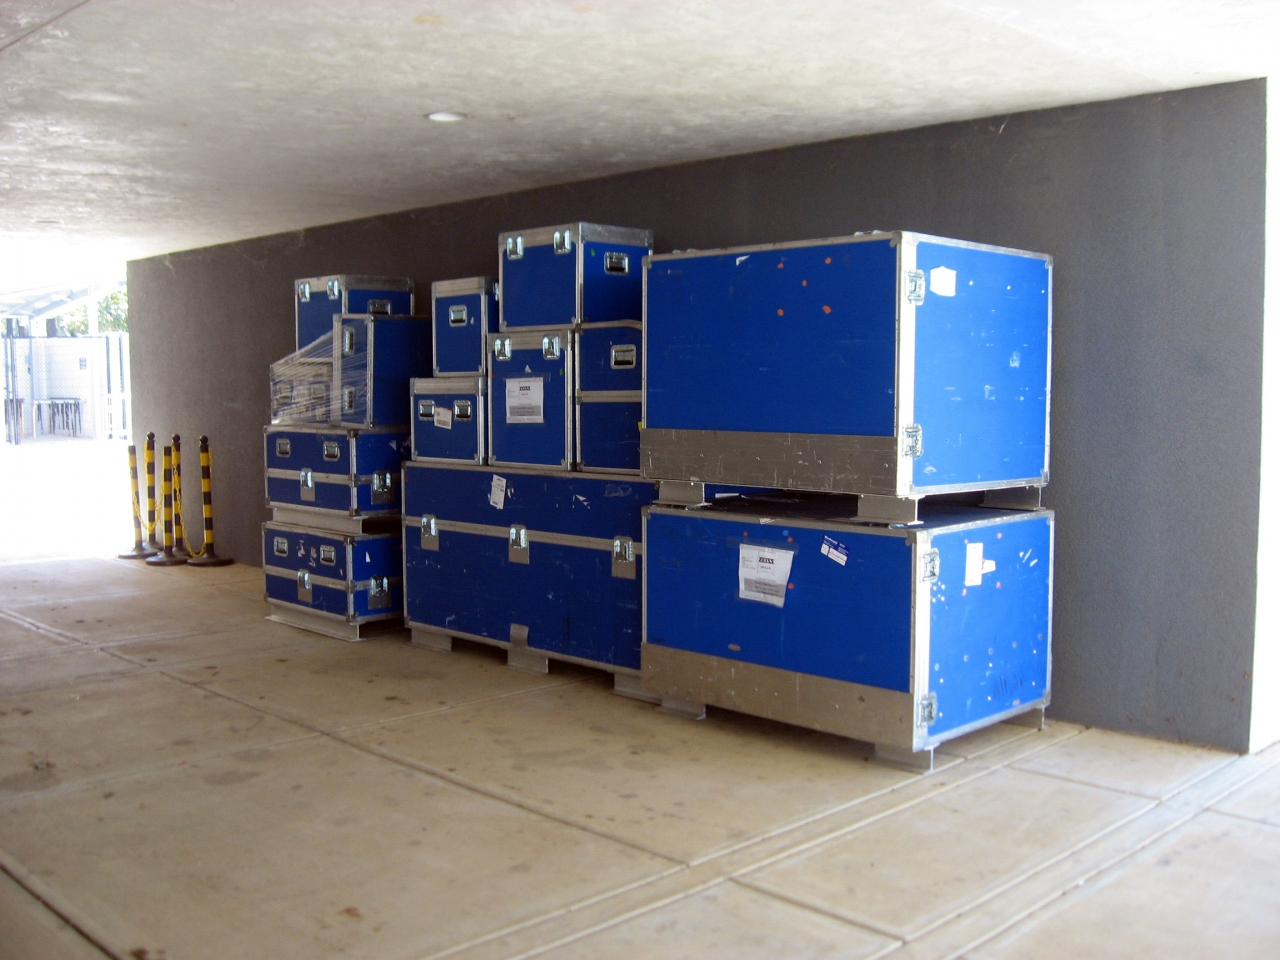 Blue boxes of various sizes.